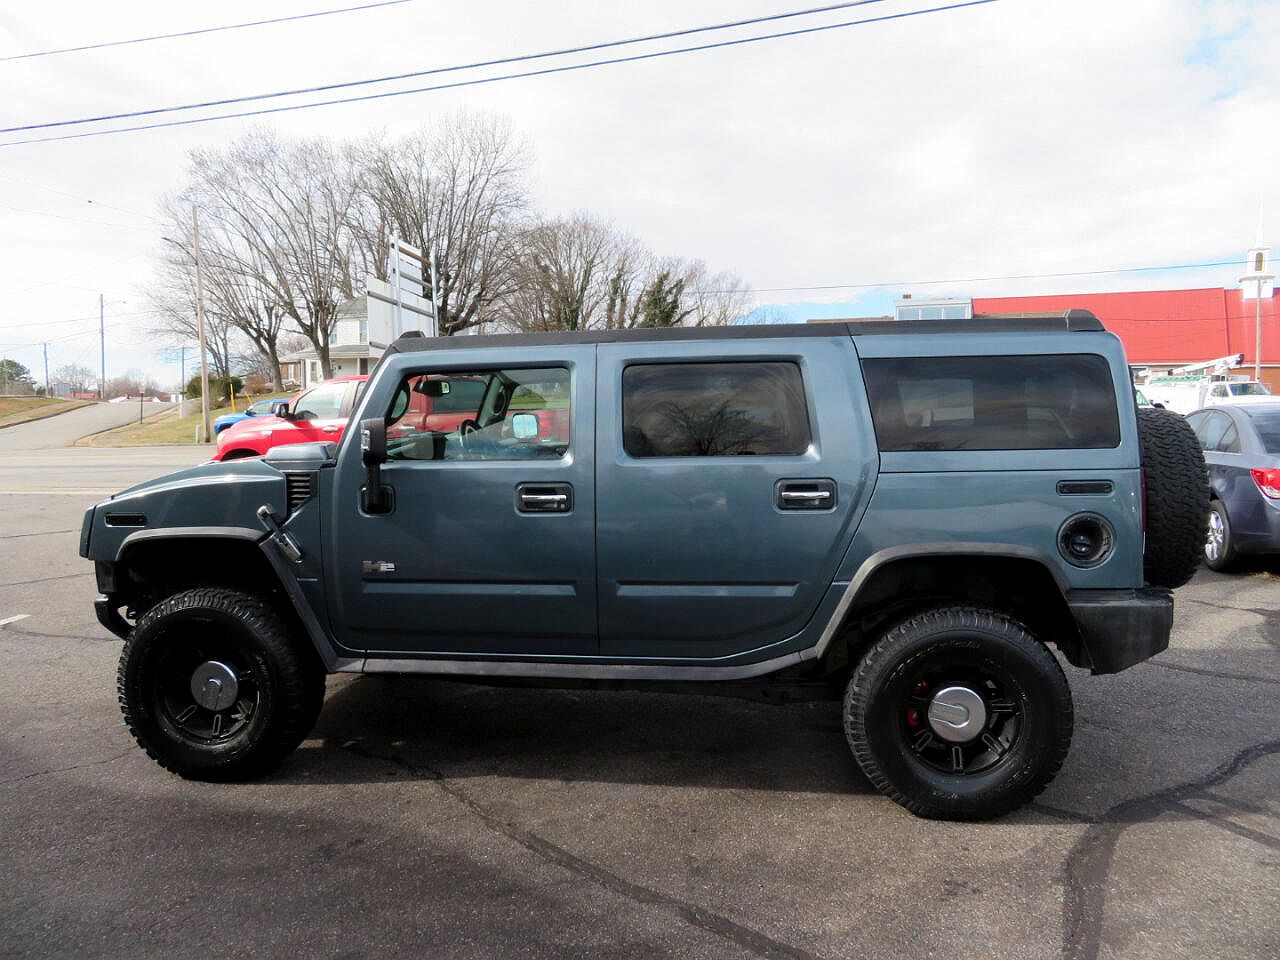 2006 Hummer H2 null image 7